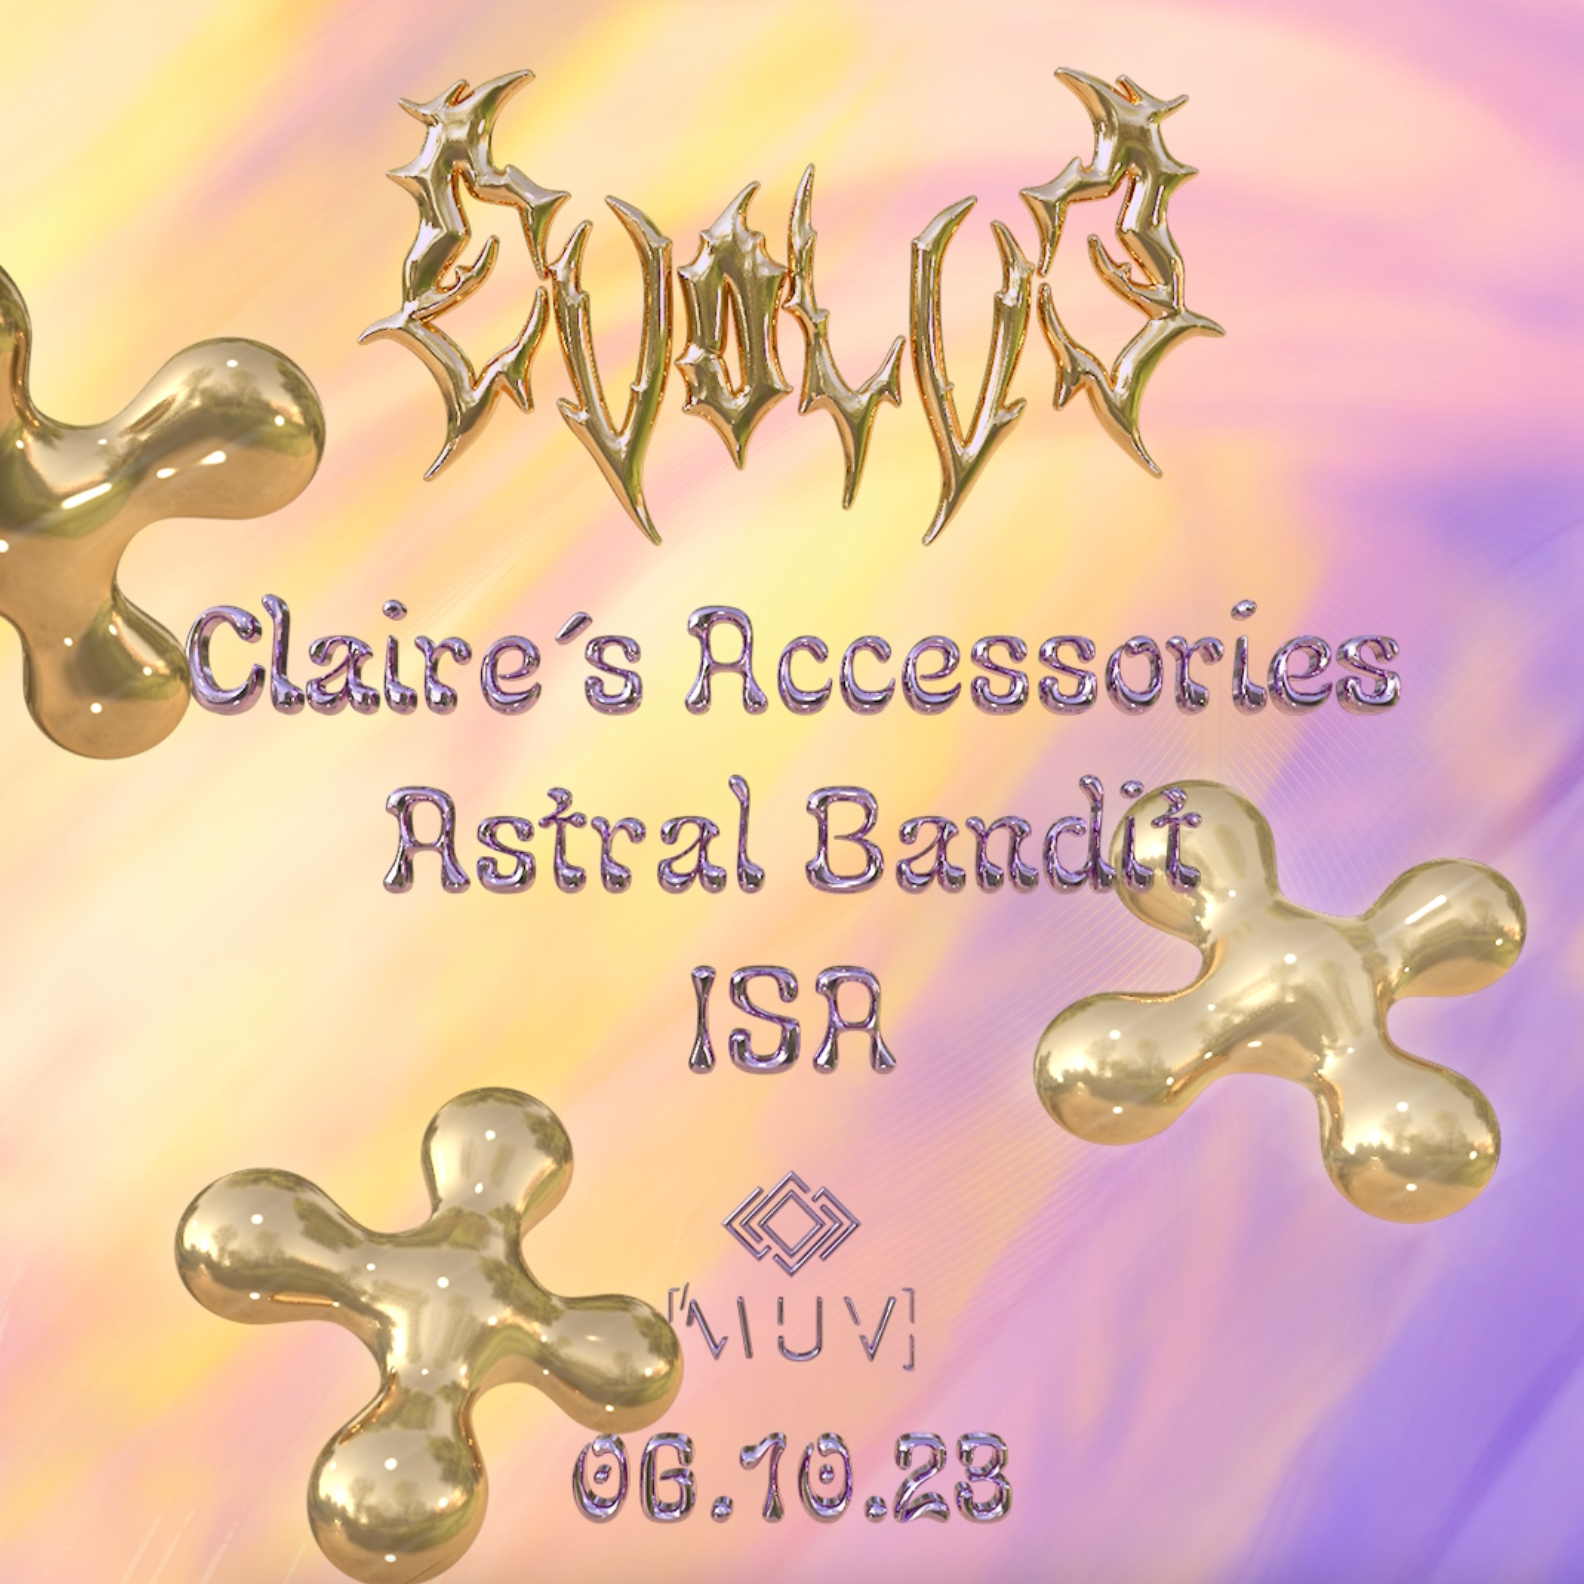 Evolve with Astral Bandit & Claire's Accessories - Página frontal